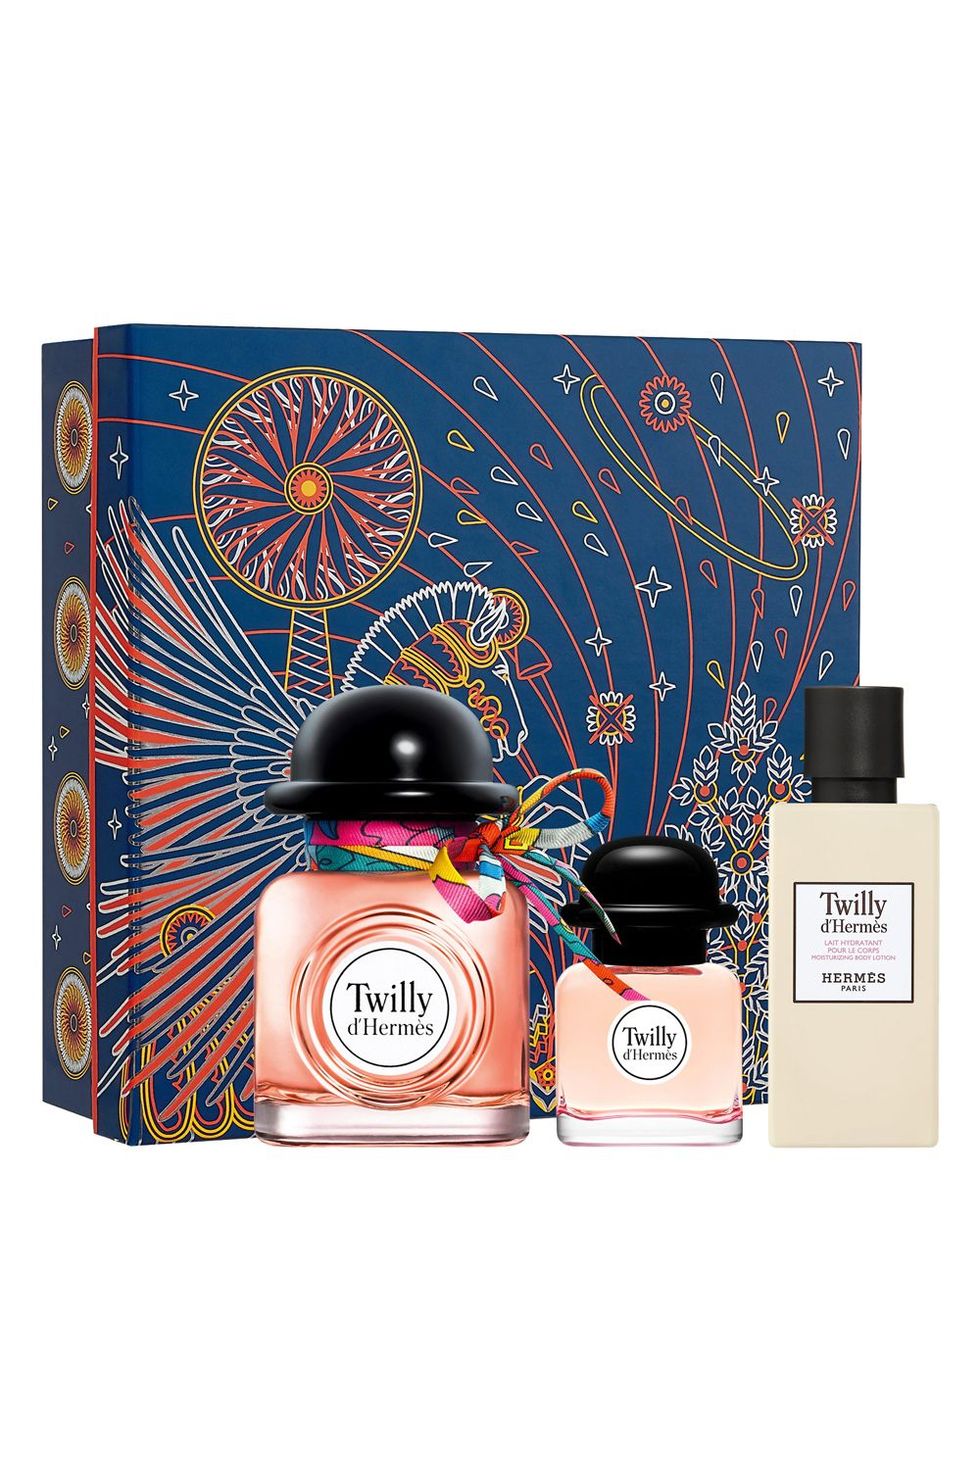 15 Best Perfume Gift Sets and Fragrance Ideas for 2020 Holidays